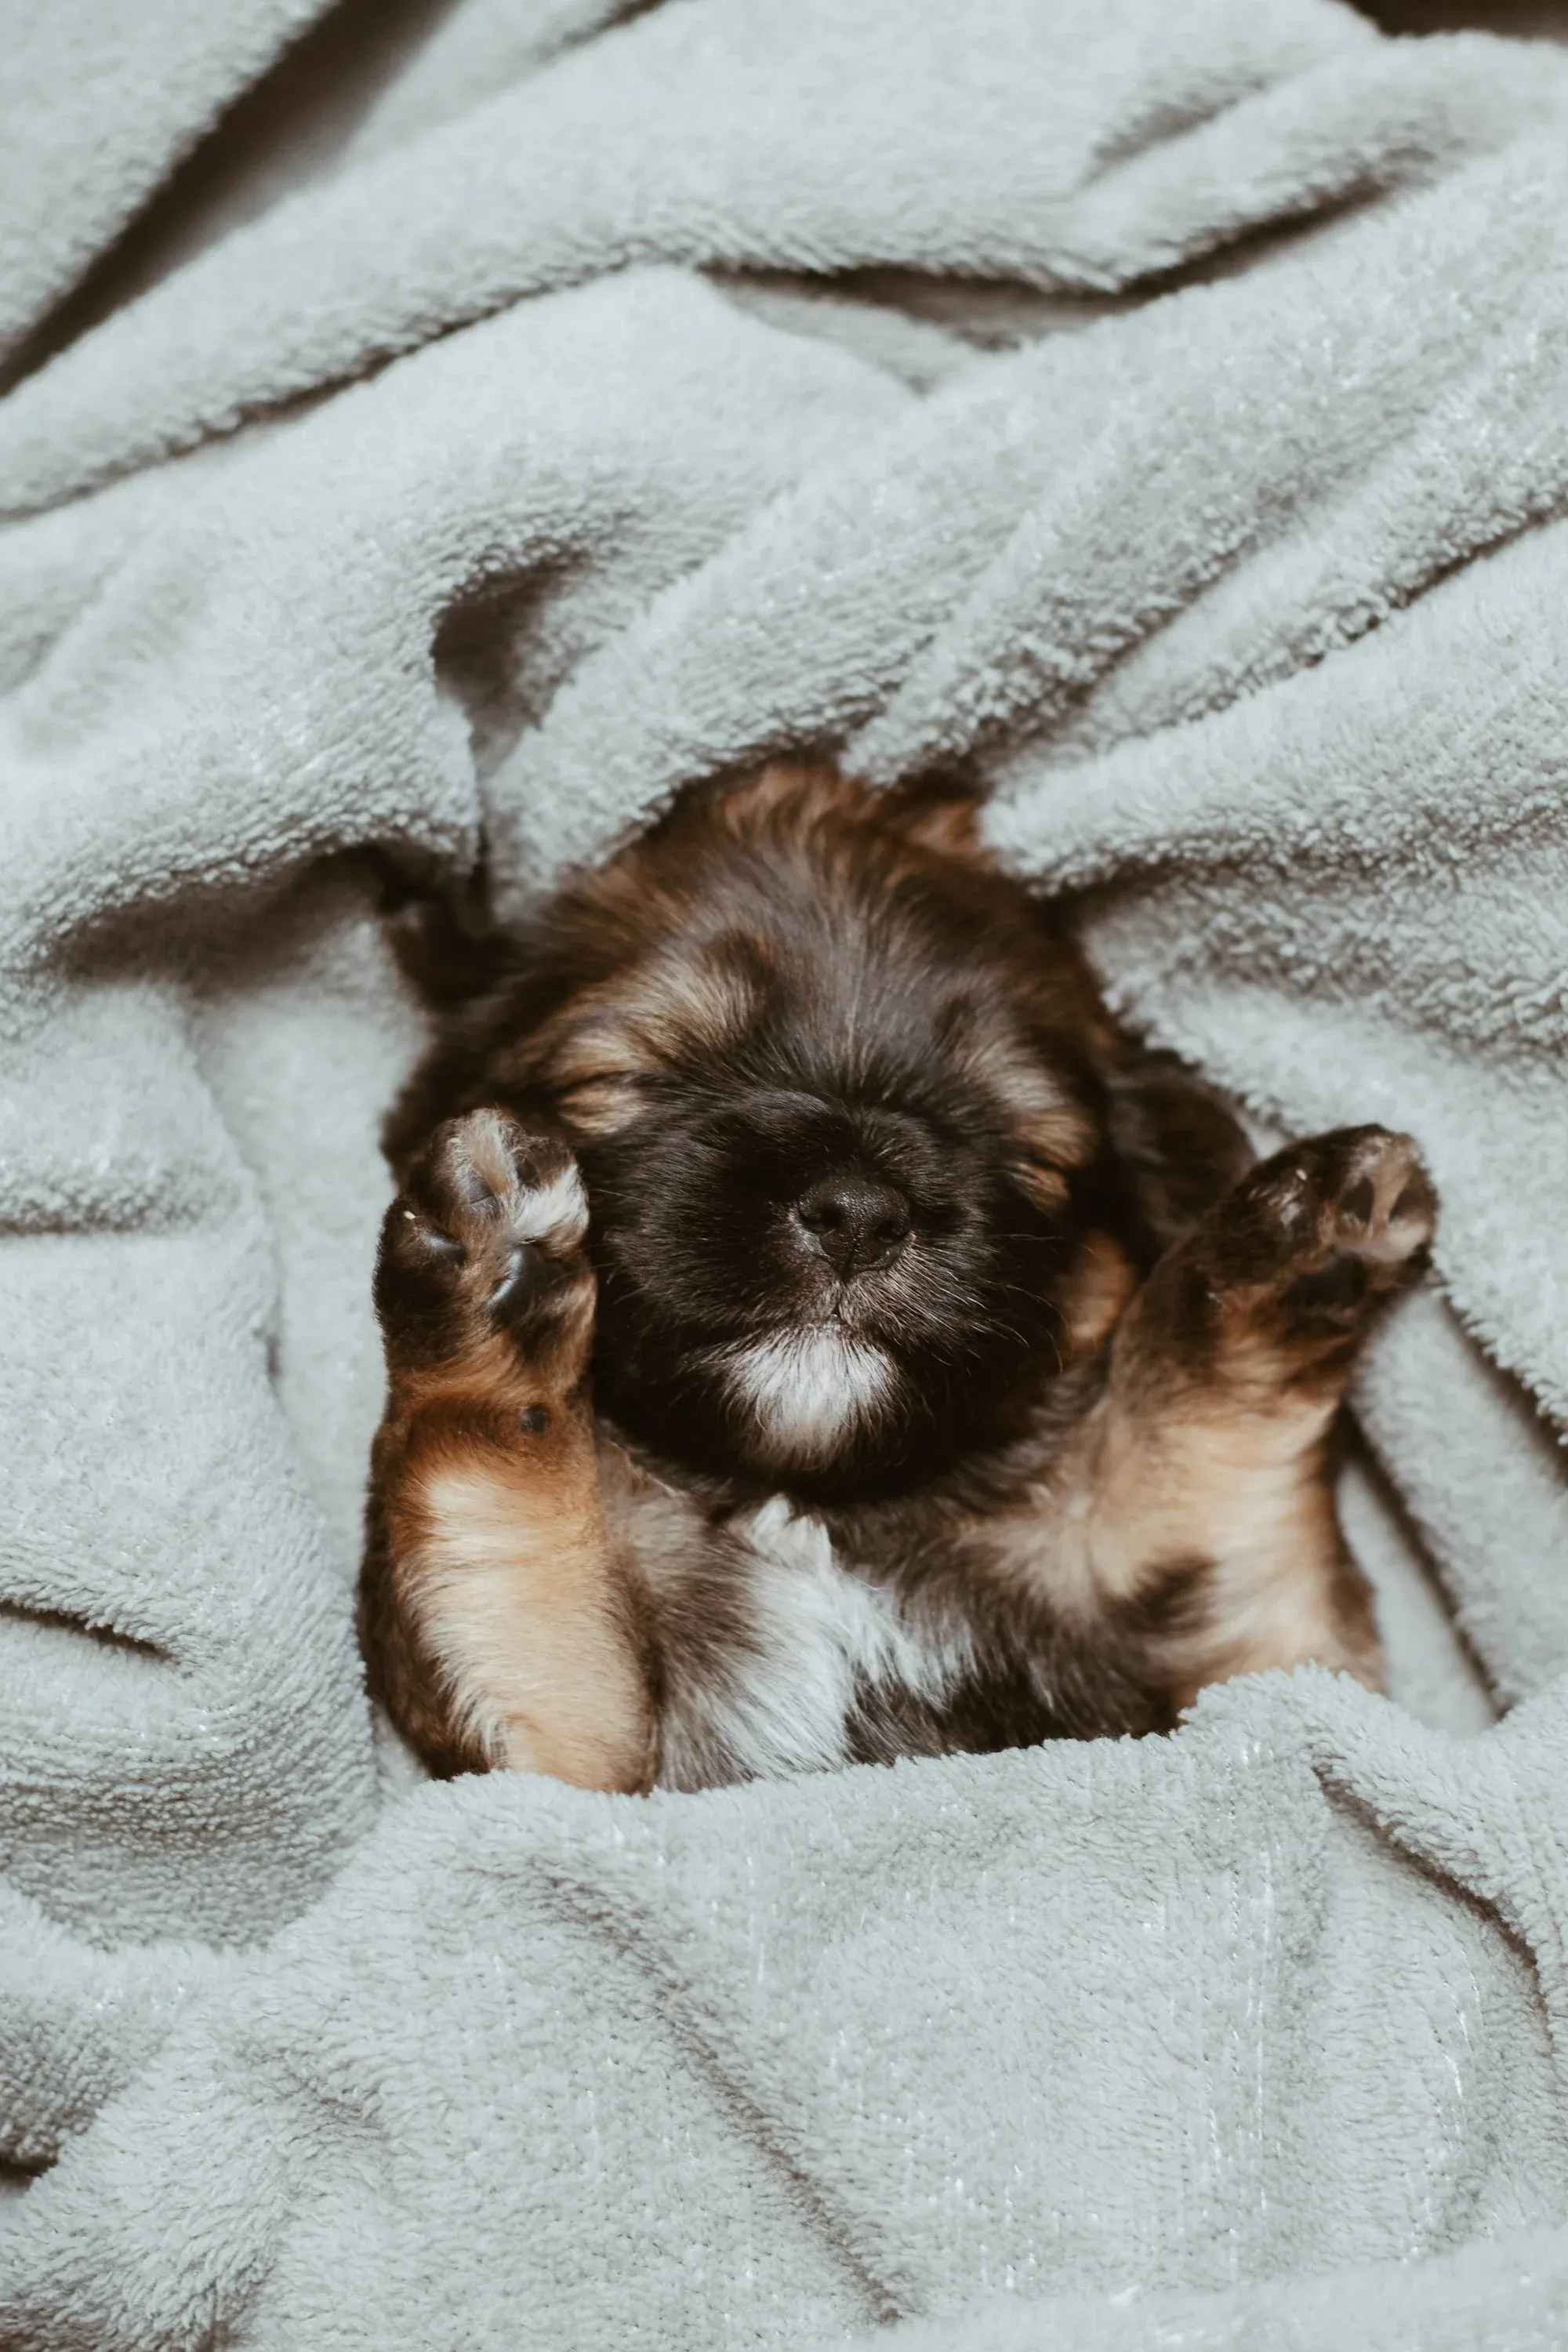 A puppy sleeping on a blanket. Full of love.